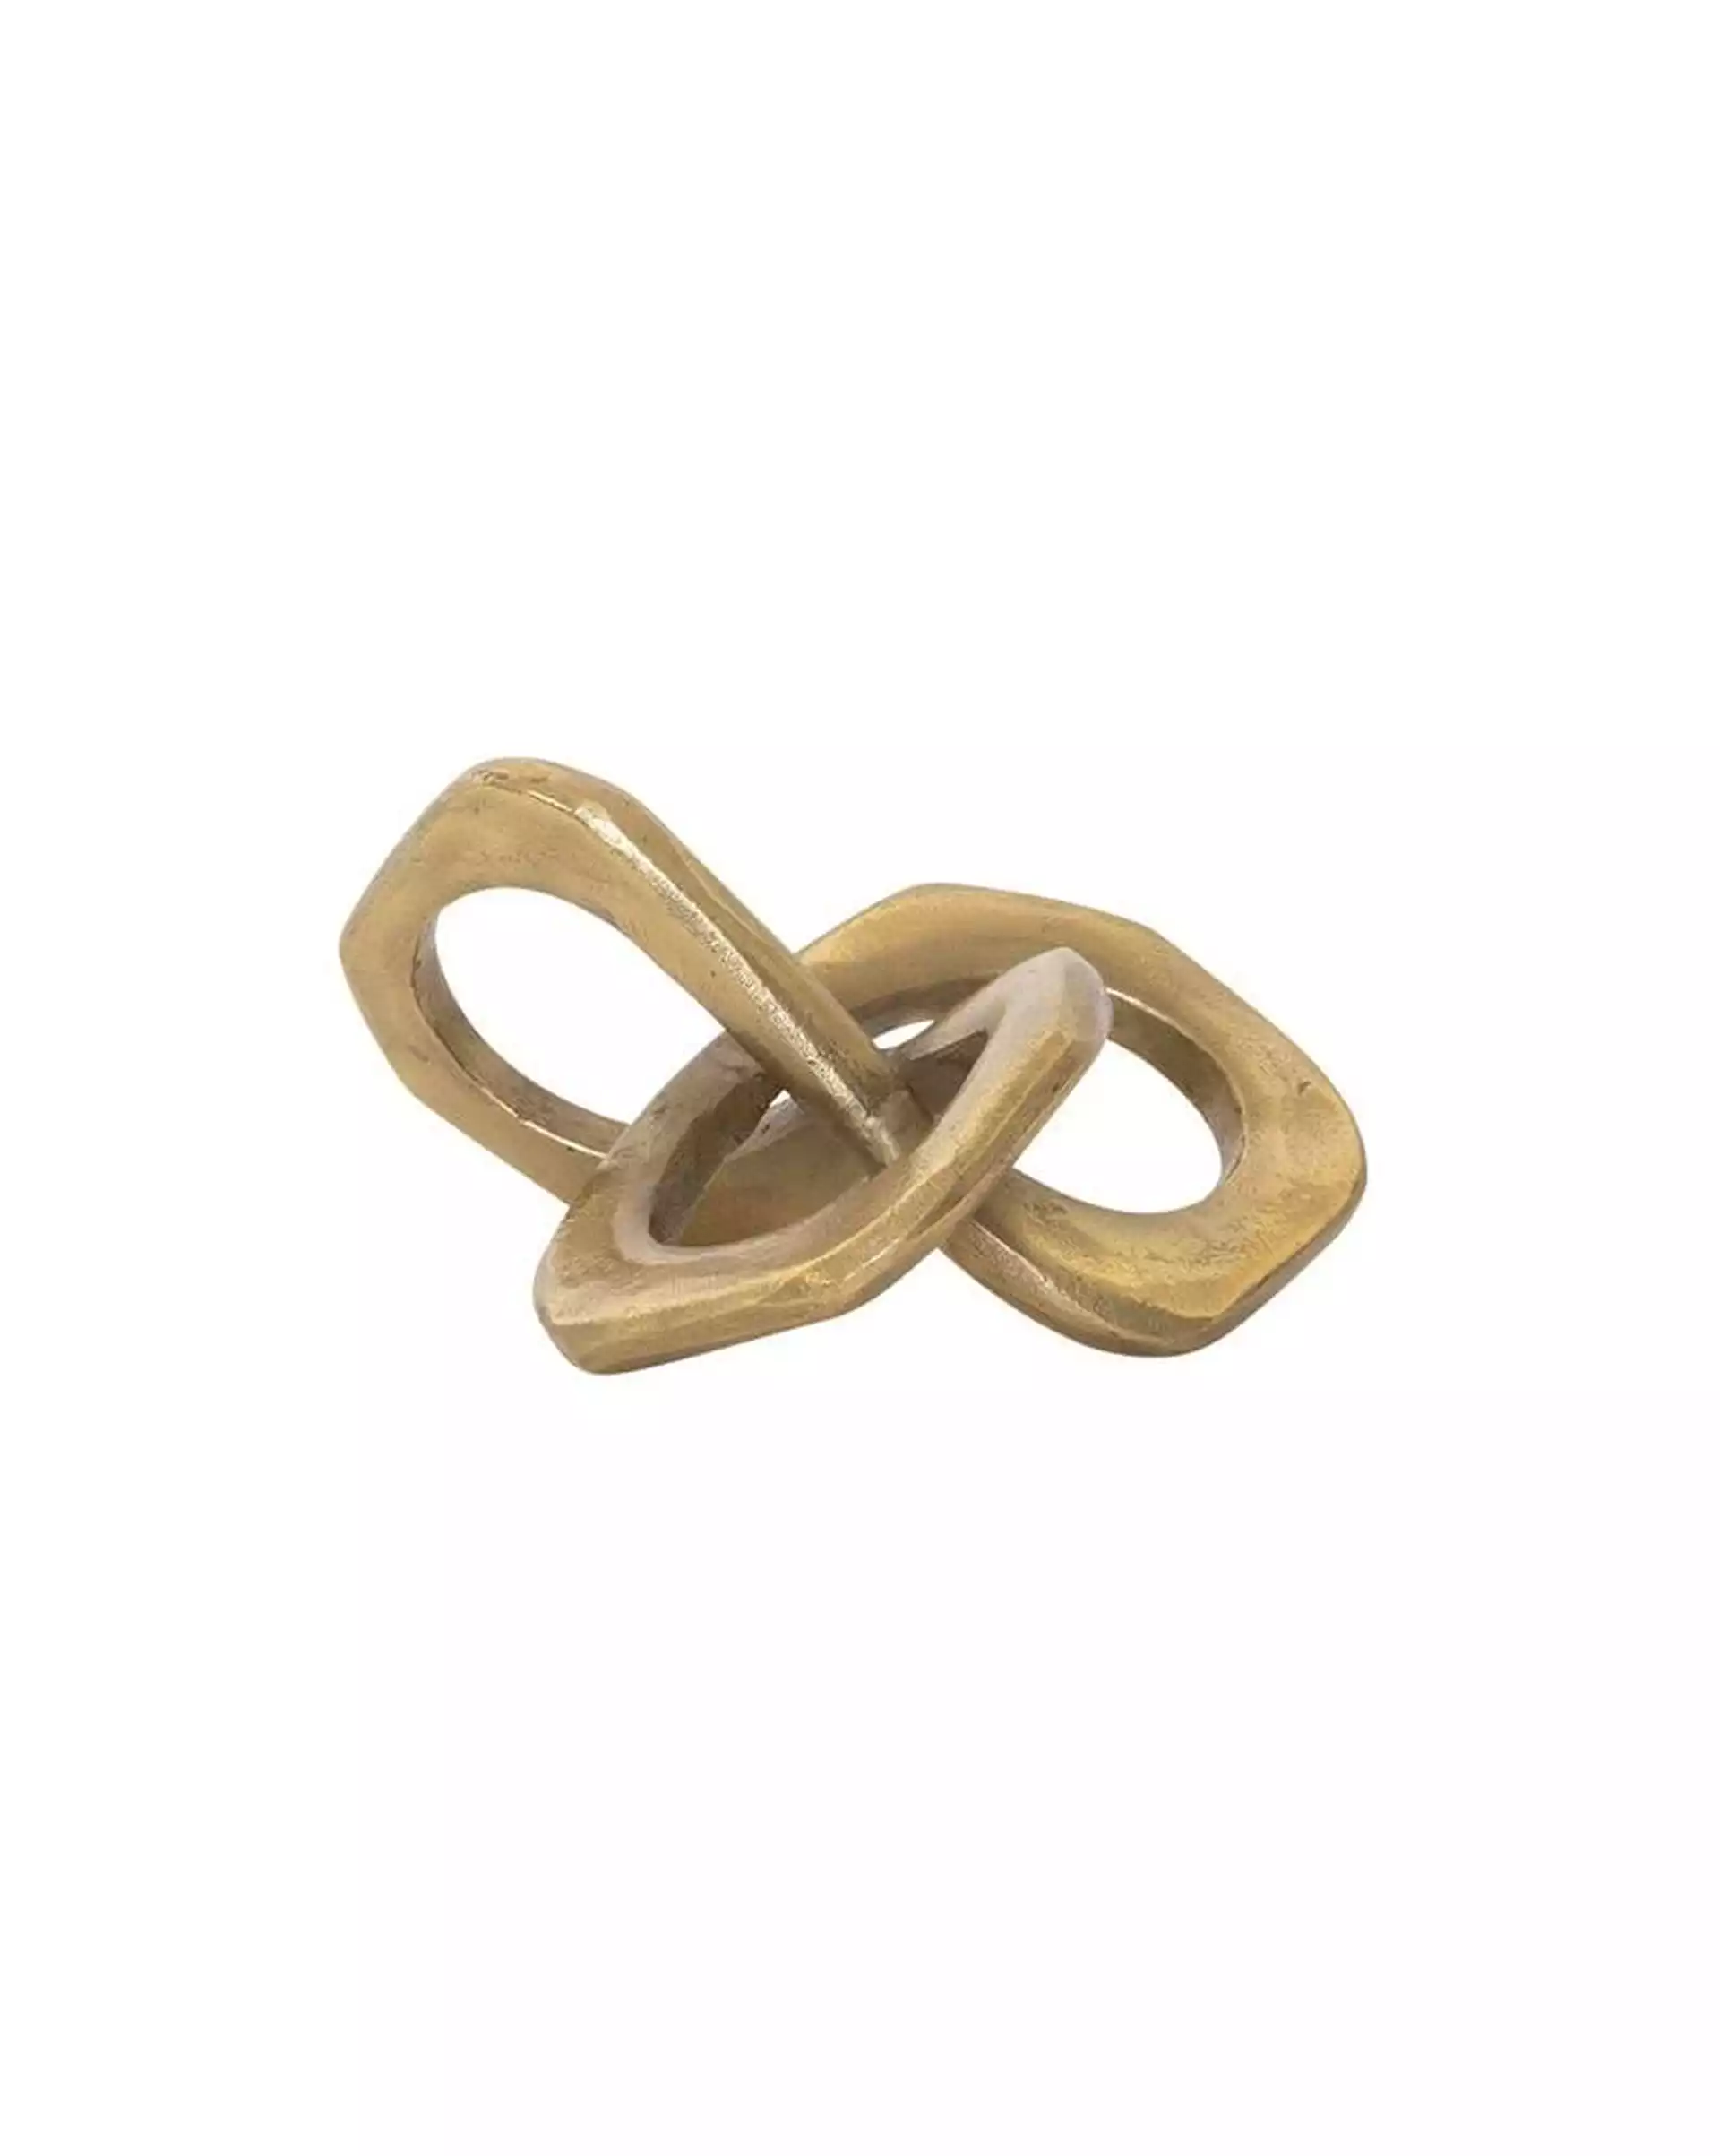 Gilded Knot Object